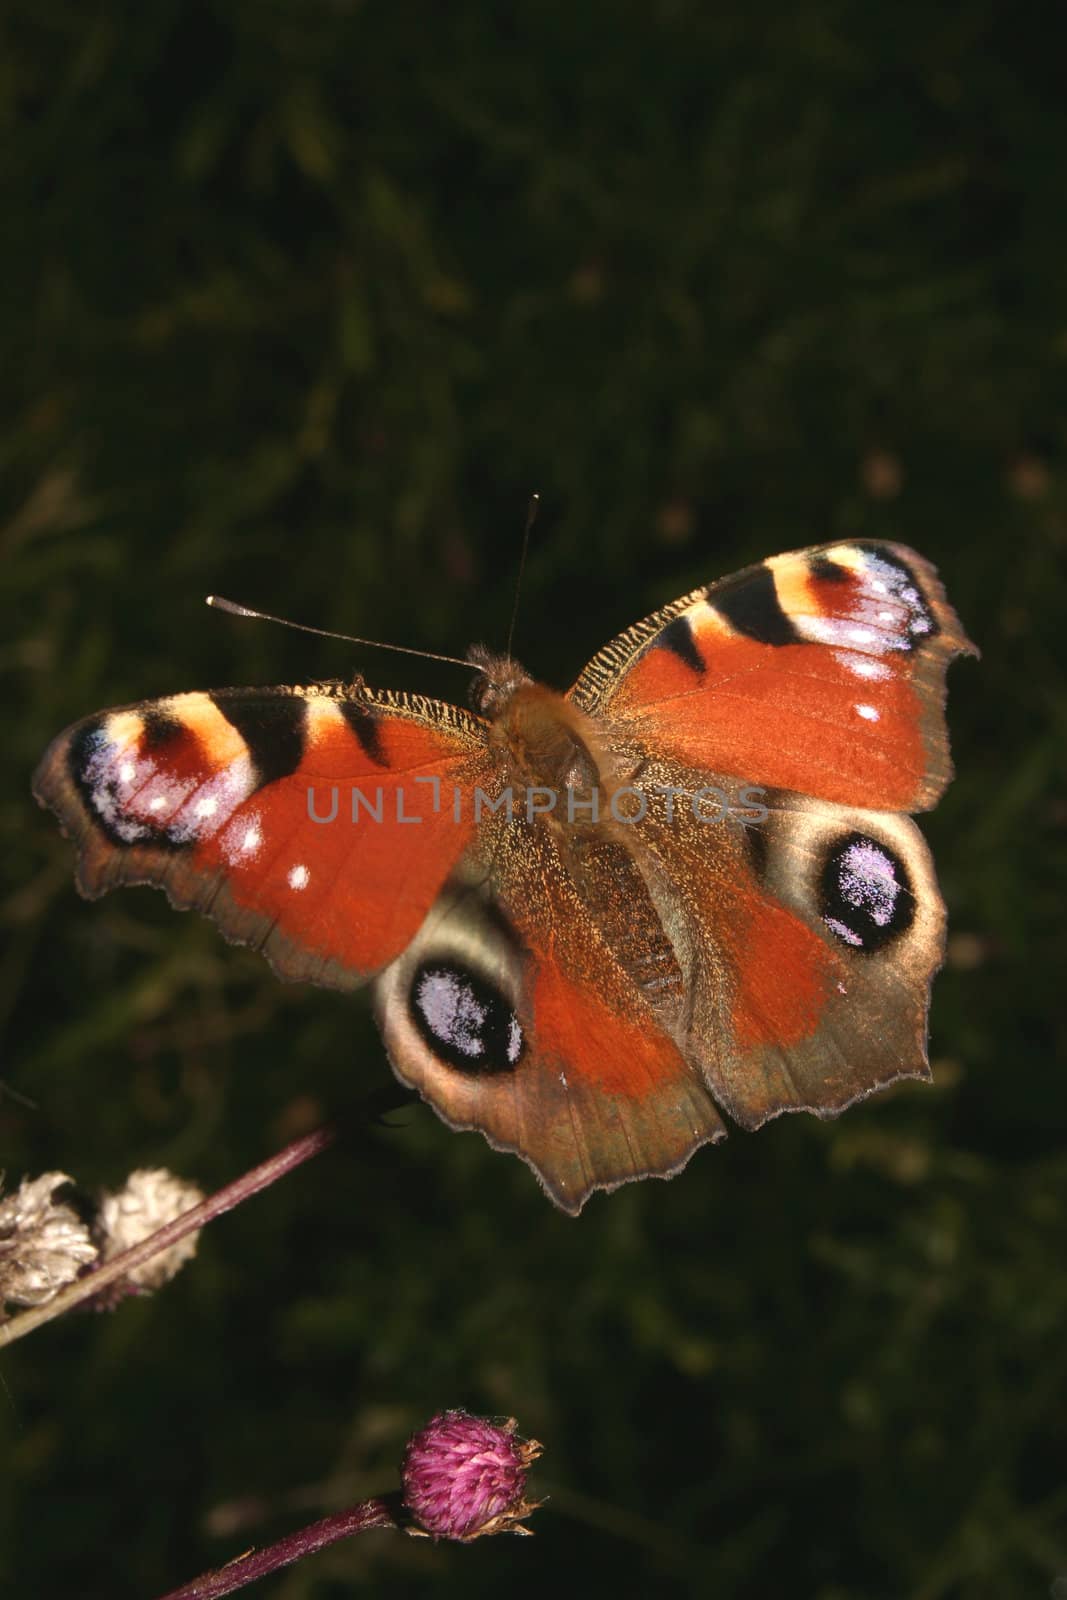 European Peacock (Inachis io) by tdietrich